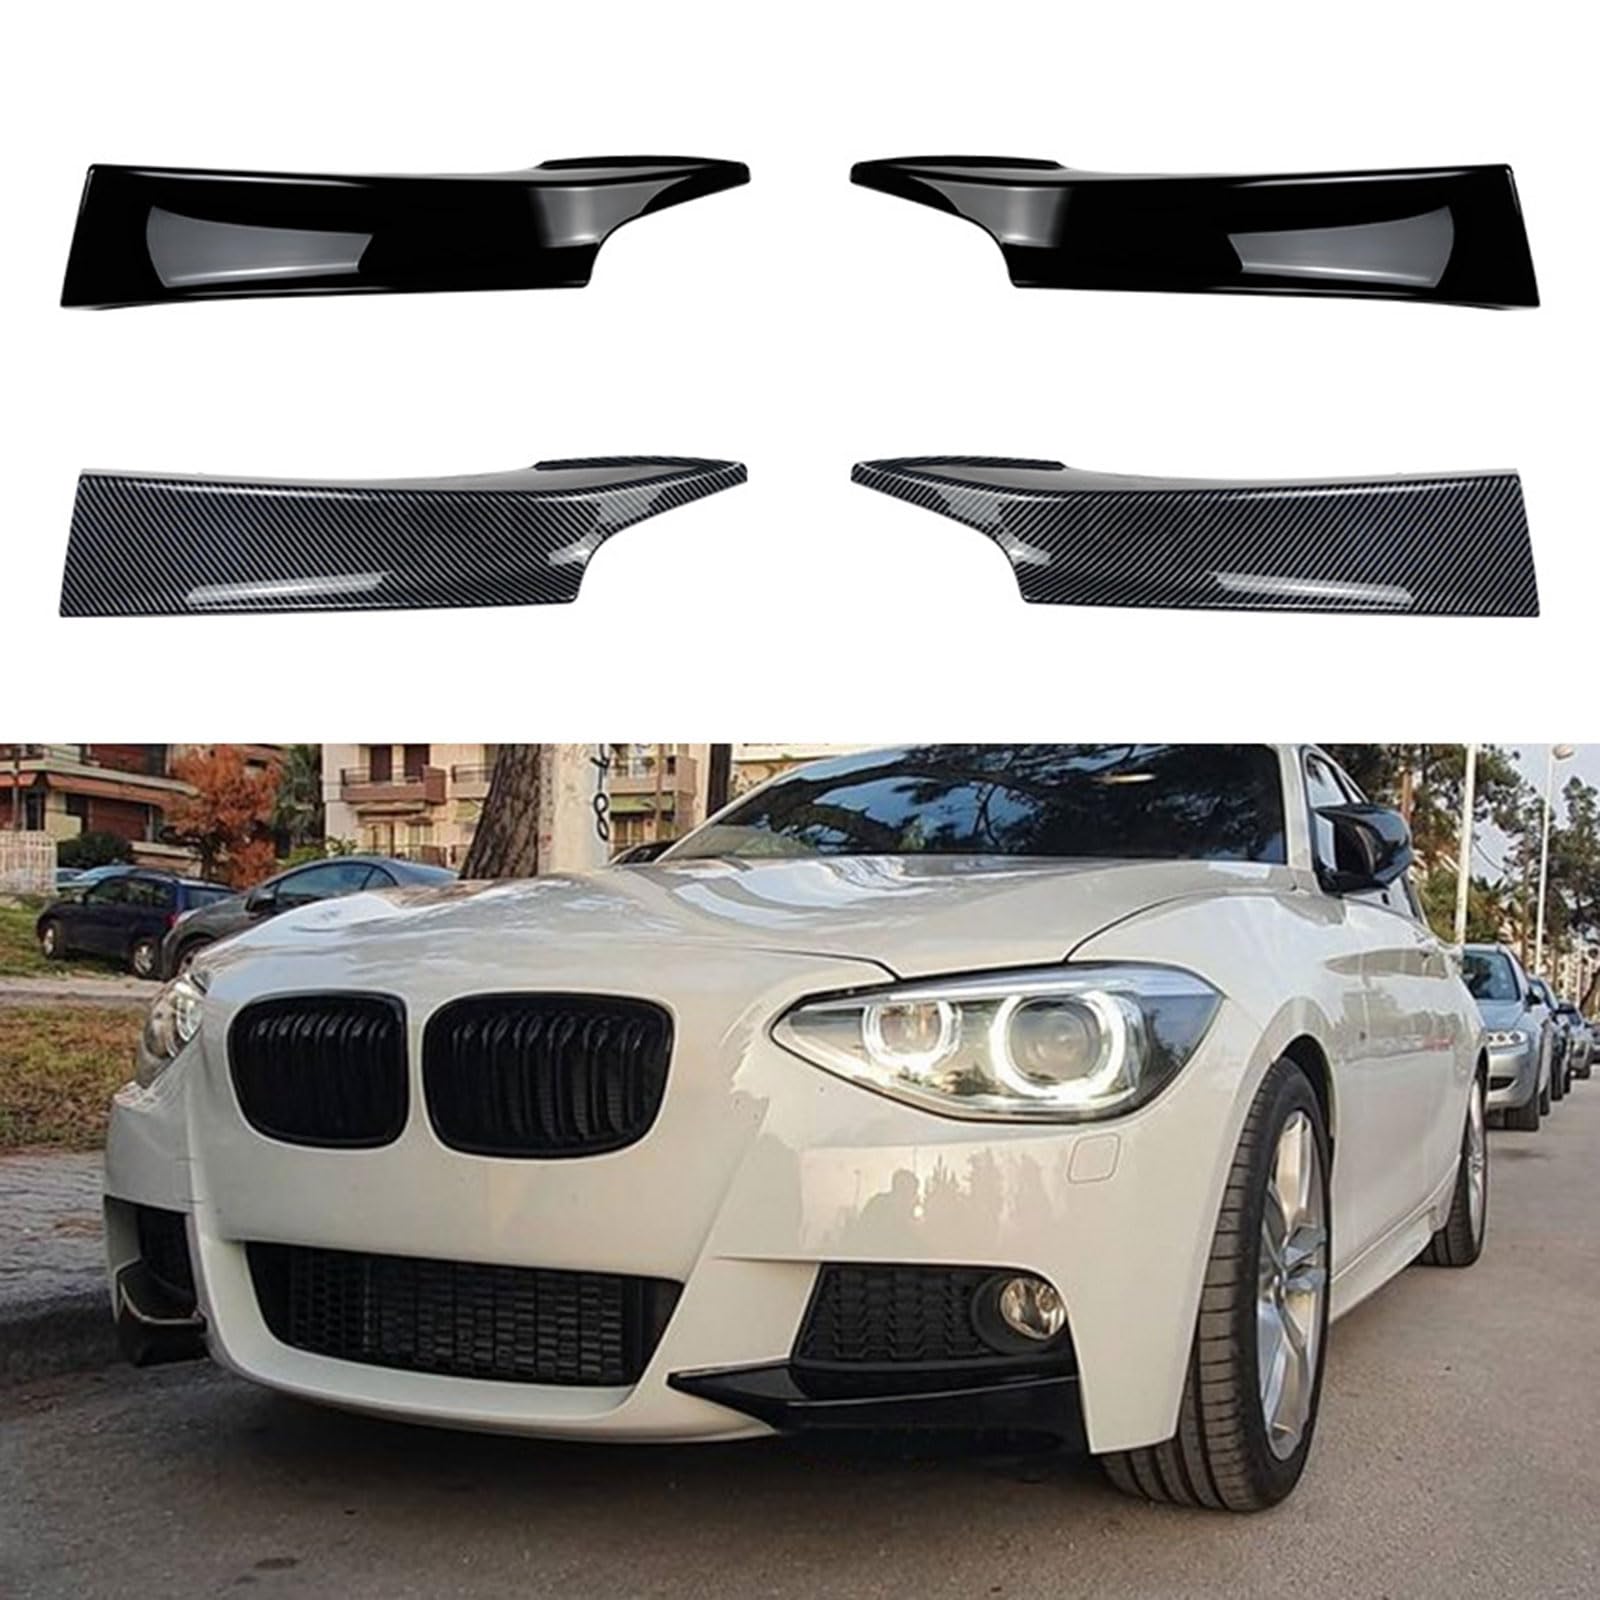 WITH001 Auto Frontlippe Frontspoiler für BMW 1 Series F20 F21 Early Years M Sport 2012-2014 120i, Frontlippe Spoiler Protector Car Styling Karosserie-Anbauteile,A Gloss Black von WITH001